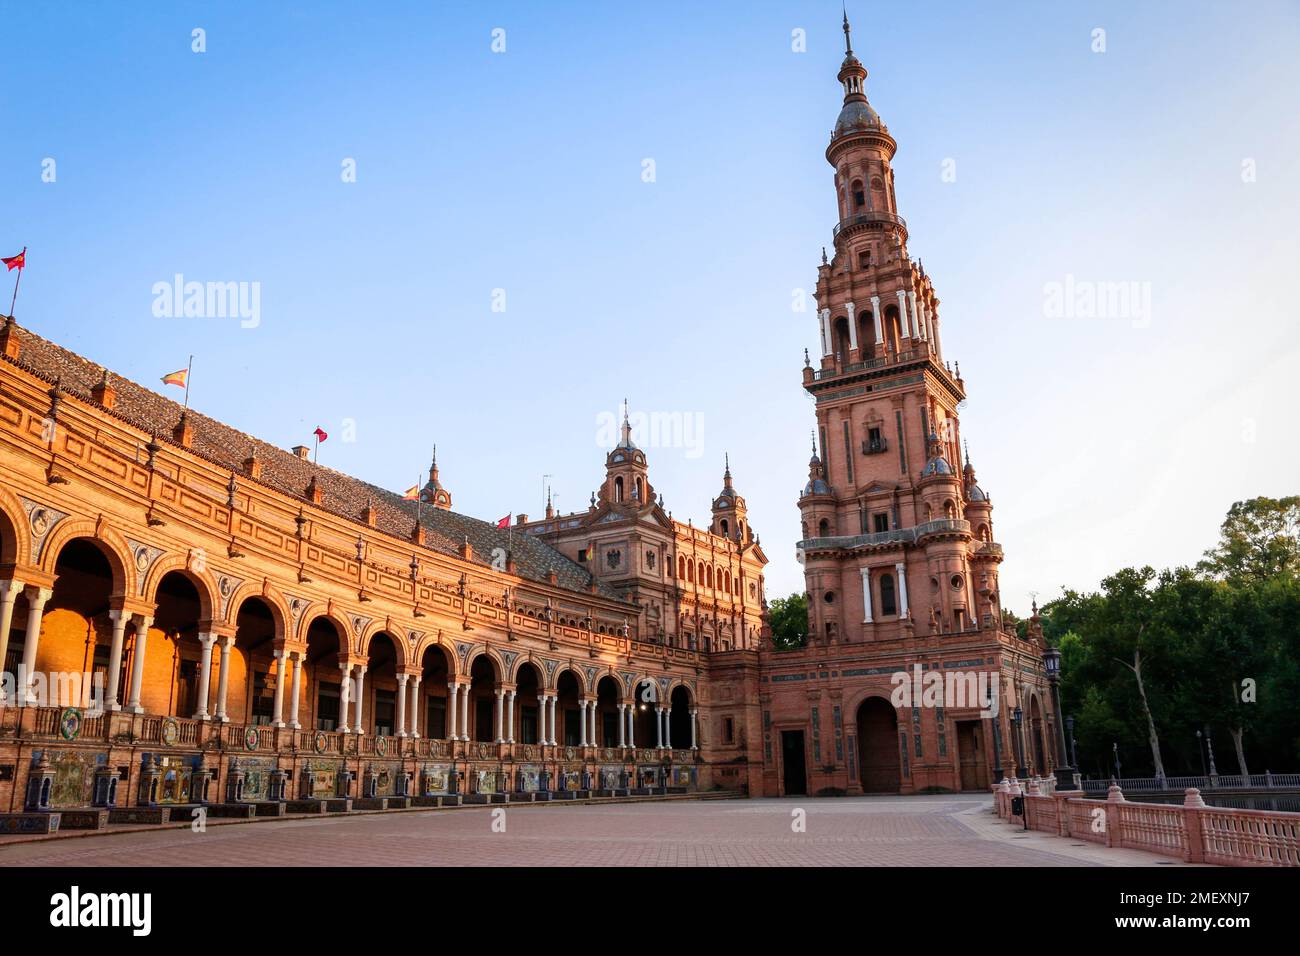 View from Plaza de España, a picturesque plaza in the city of Seville, Spain Stock Photo